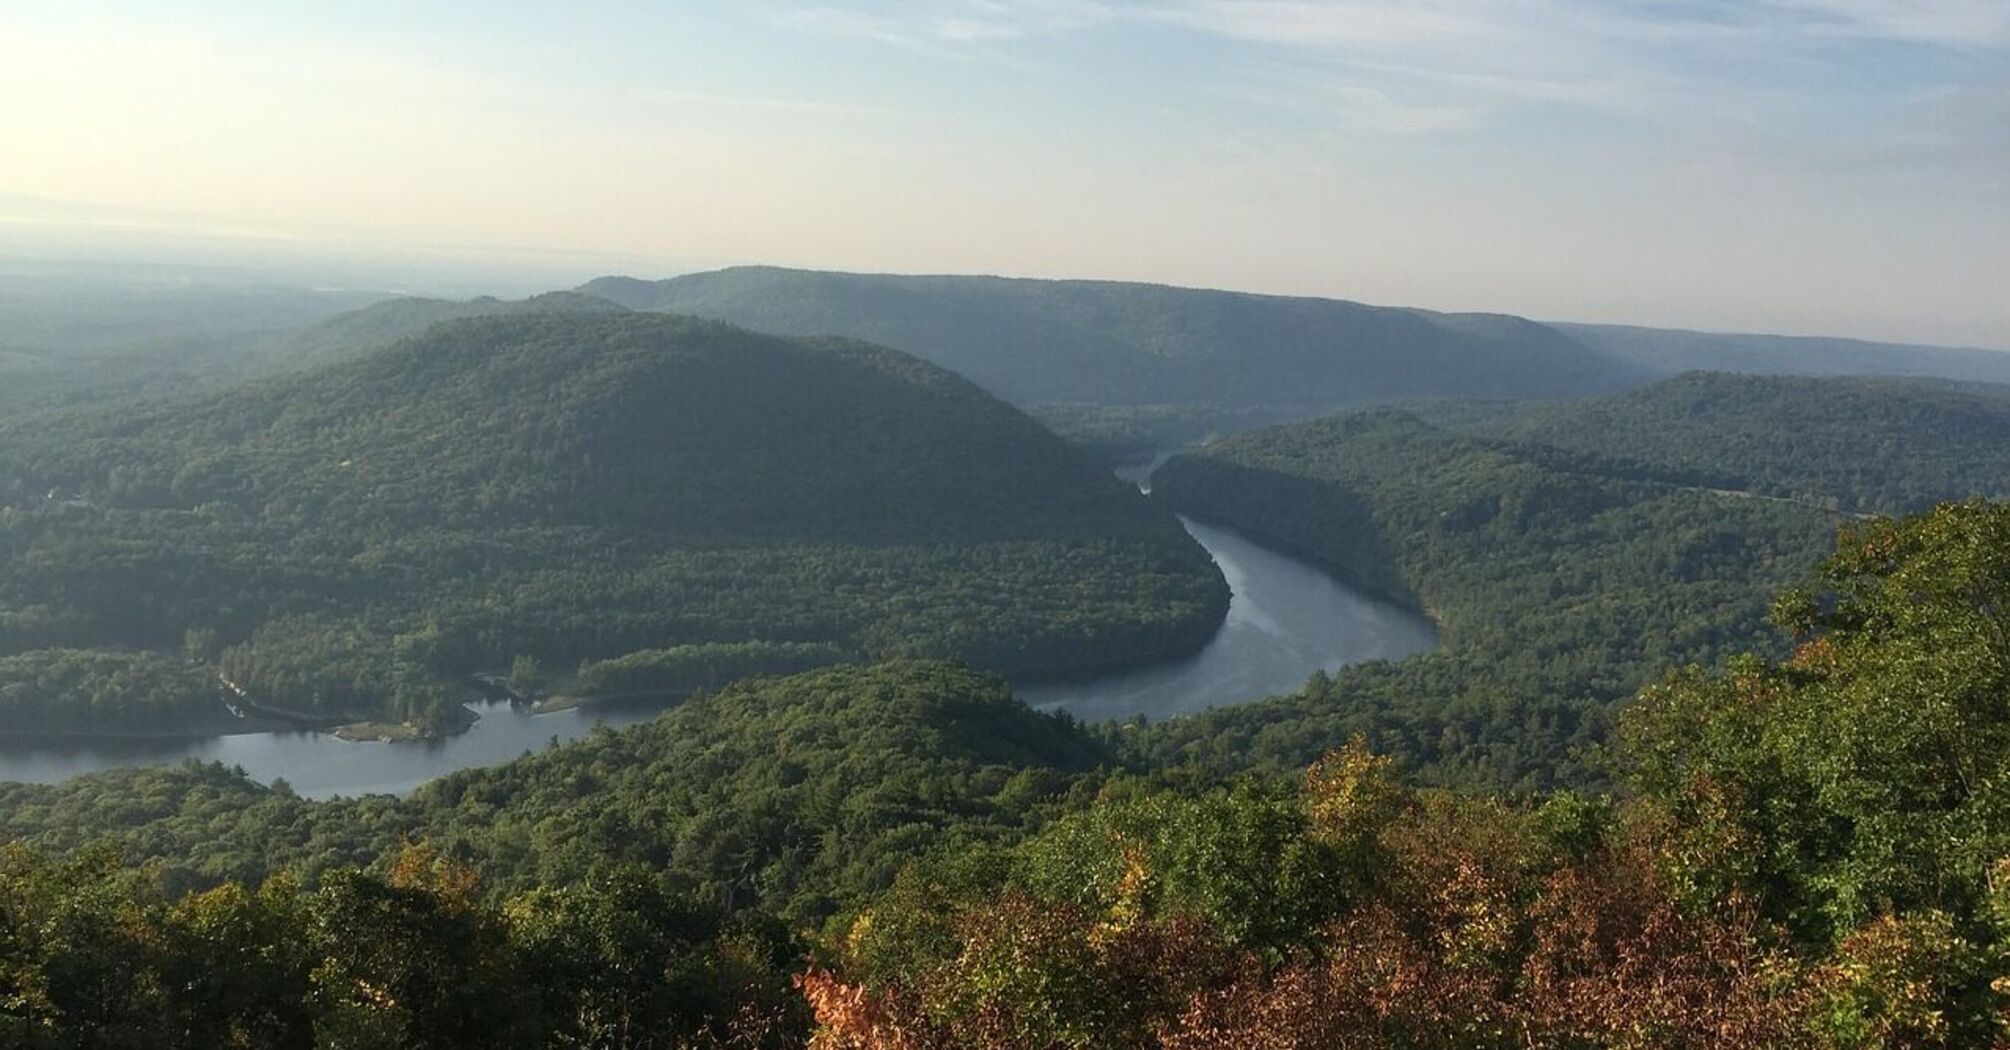 Hudson River Valley resorts: Top 9 most popular locations